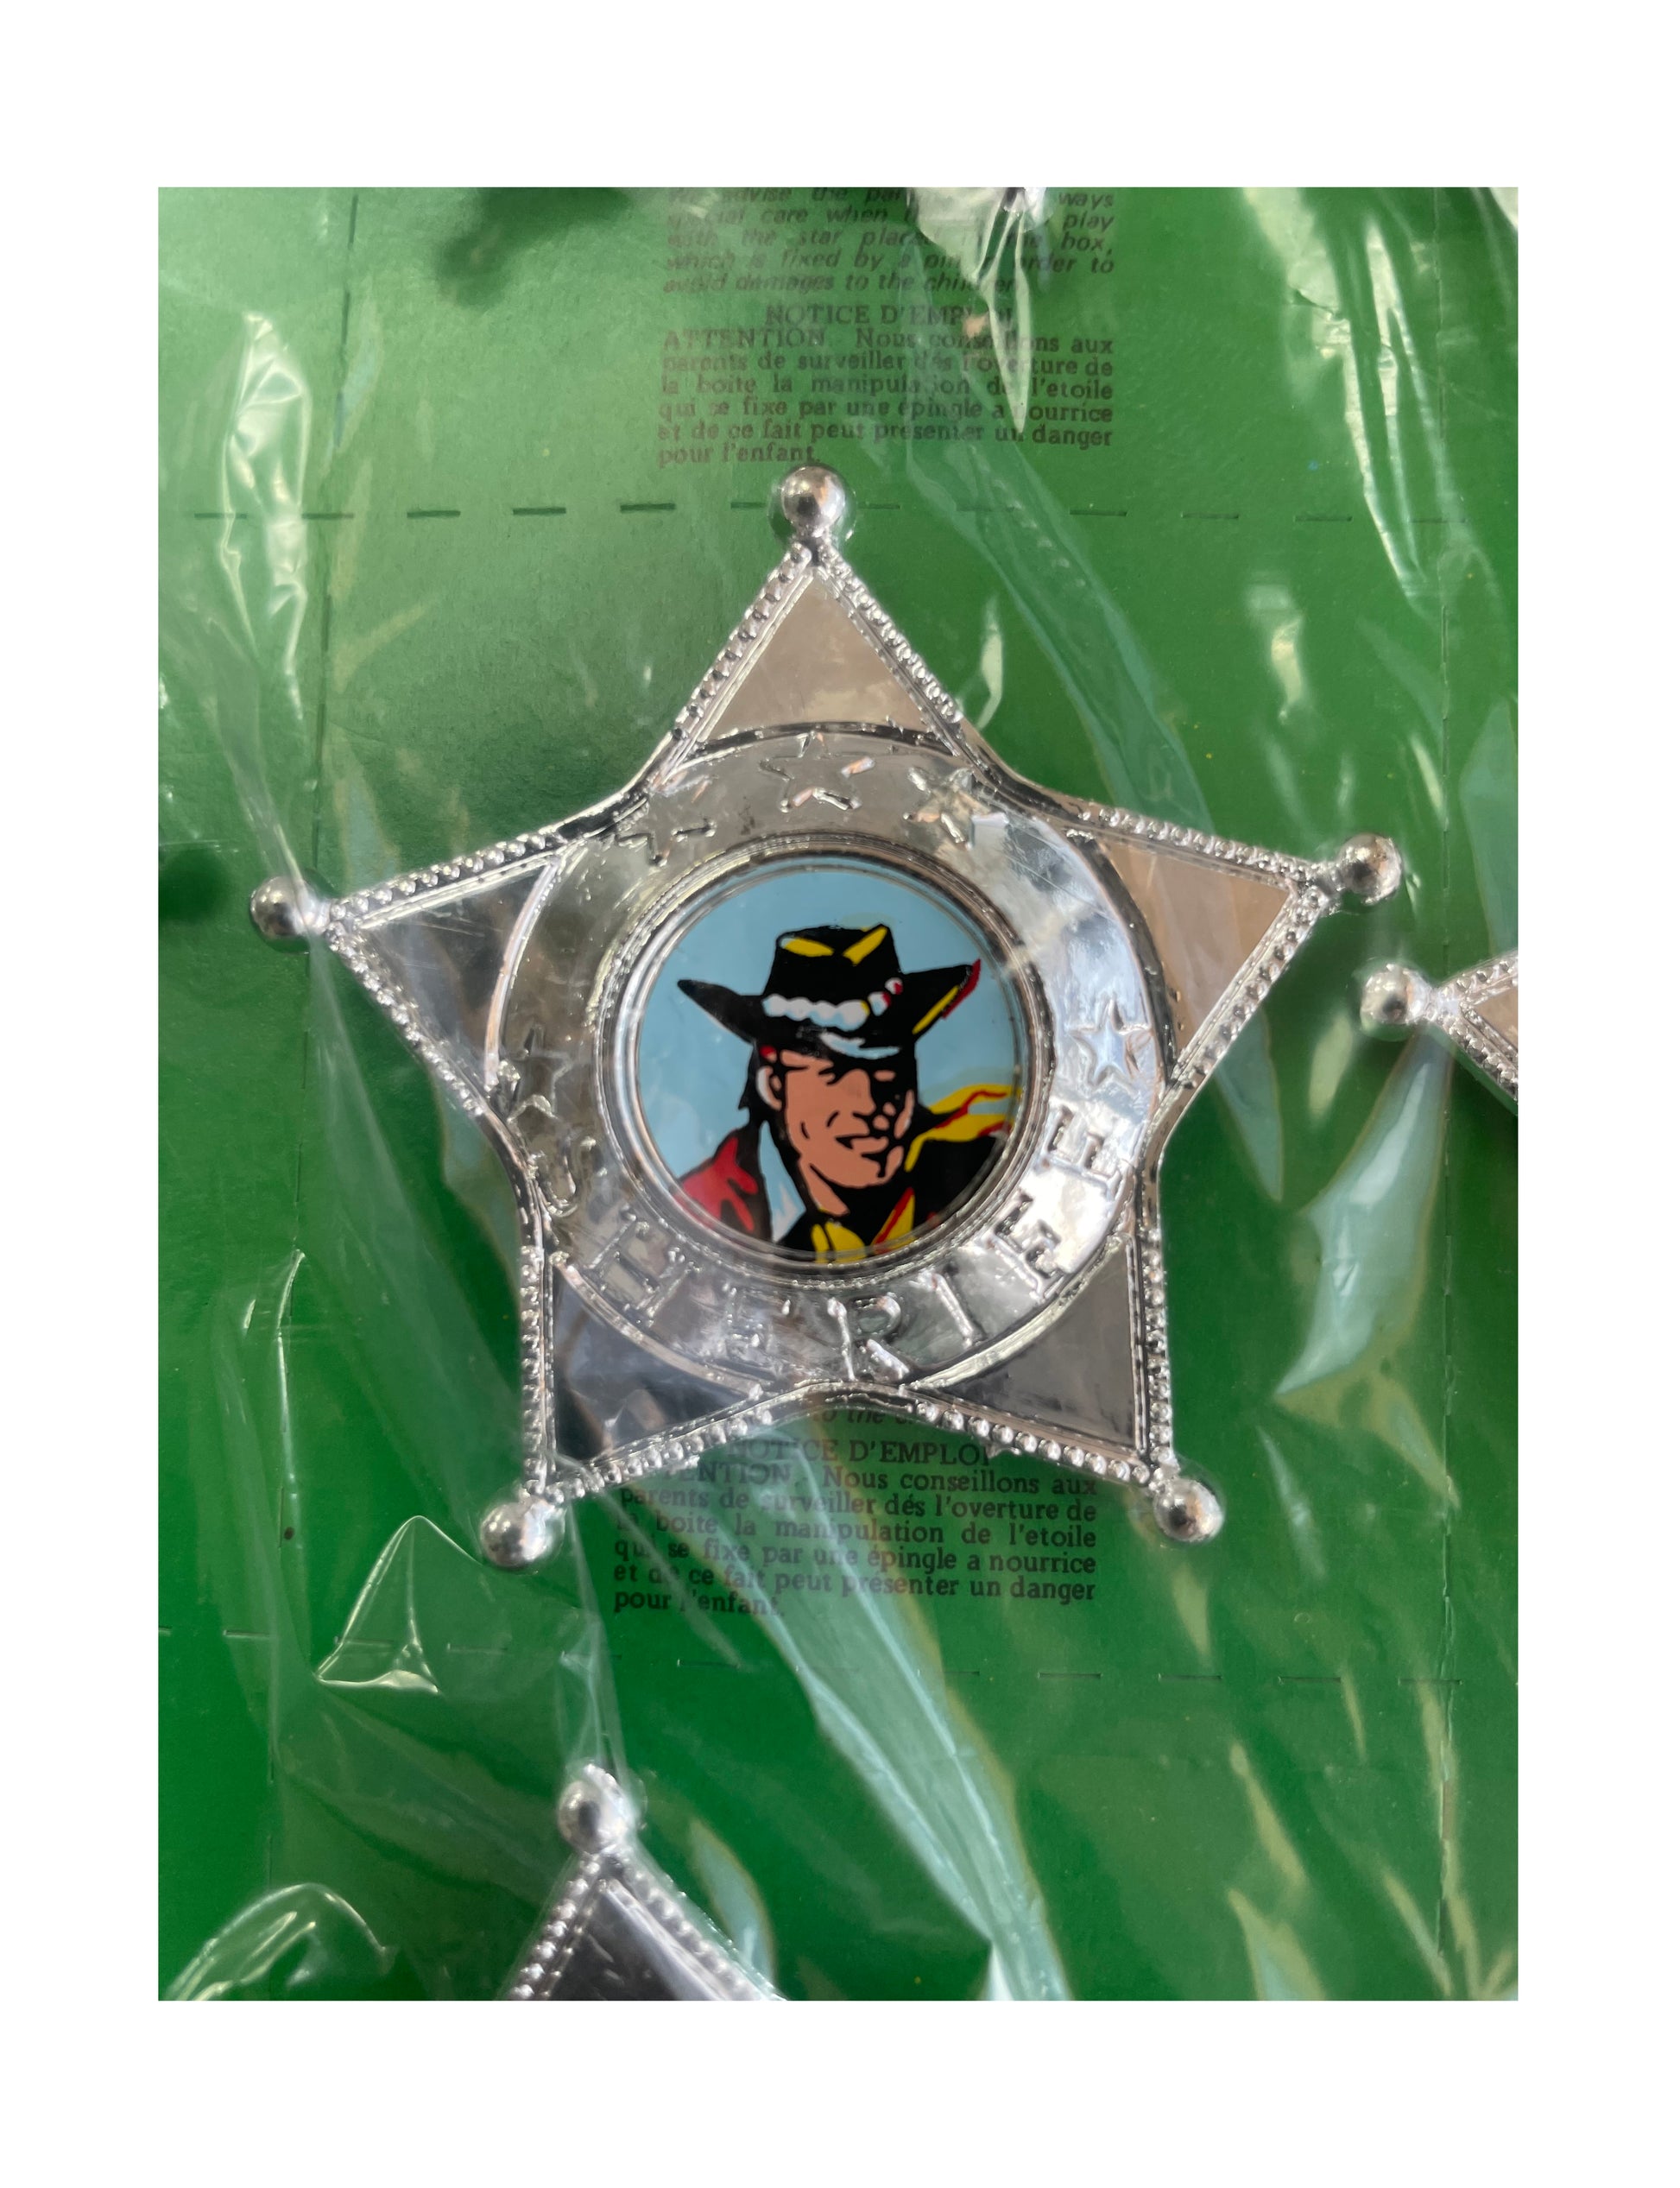 Vintage 1950's / 1960's Gonher / Barval Sheriff Star Pin Badge - Set Of 12  On Shop Display Card - Un Punched